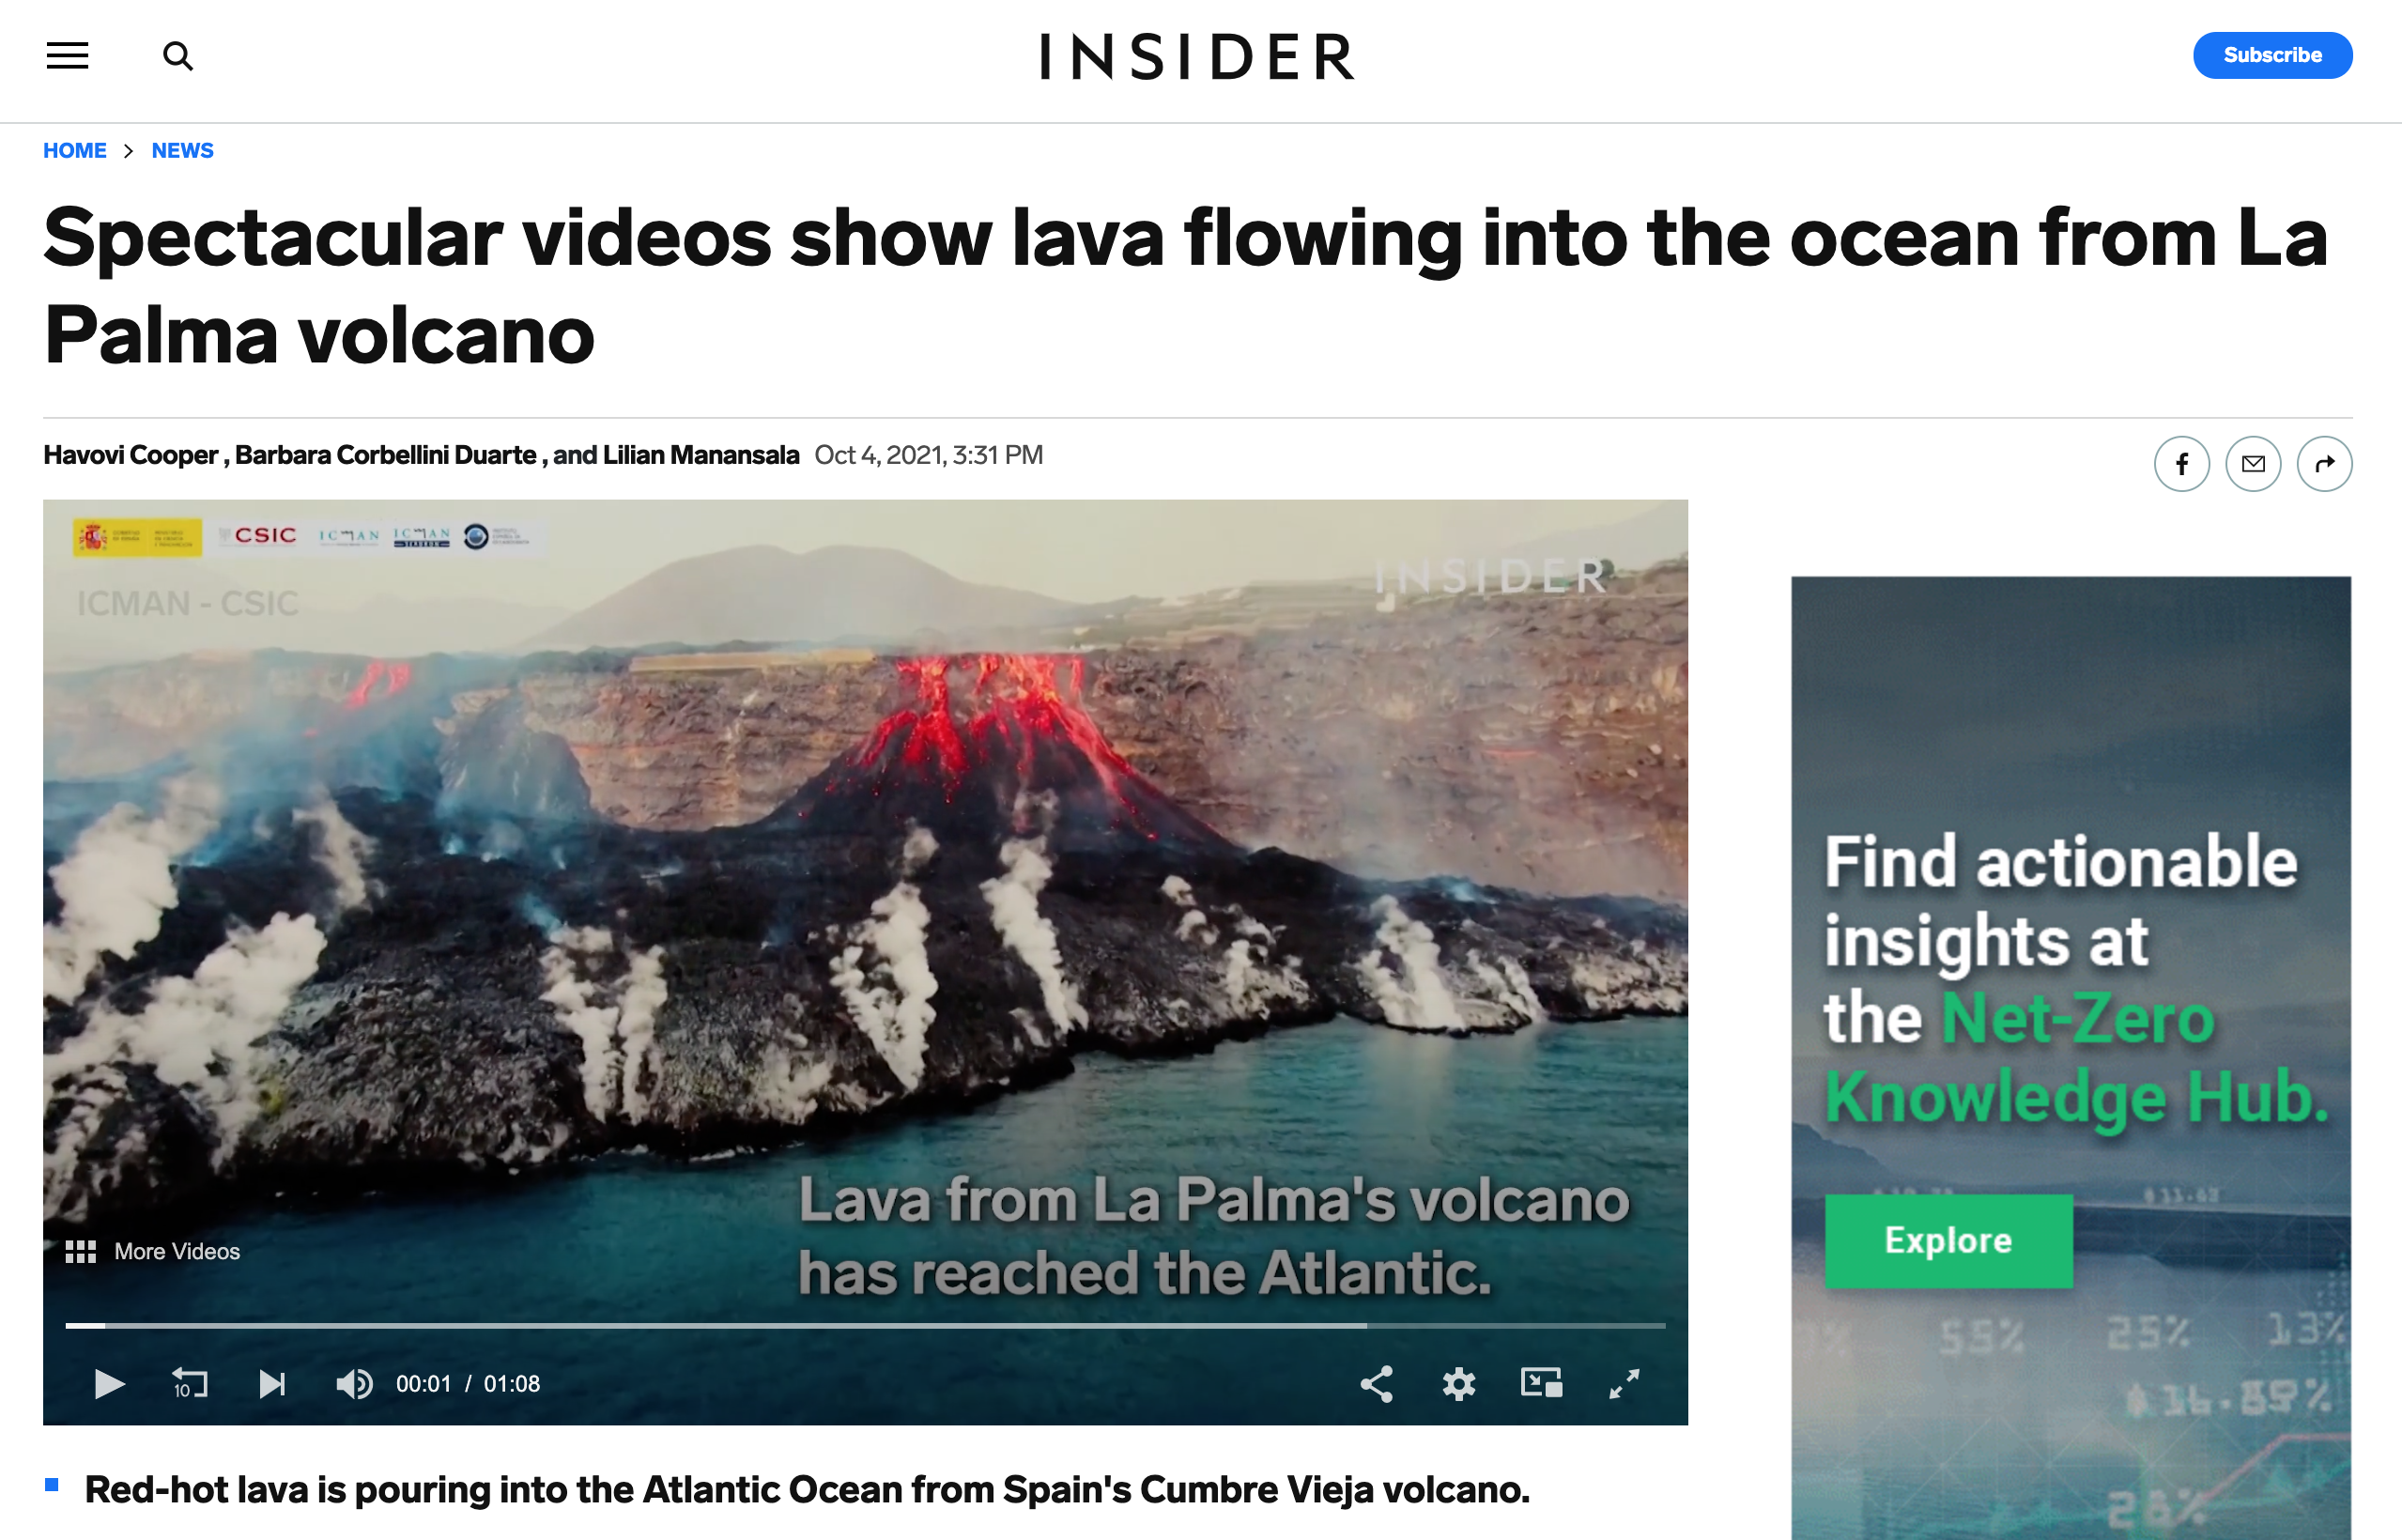 Spectacular videos show lava flowing into the ocean from La Palma volcano - 